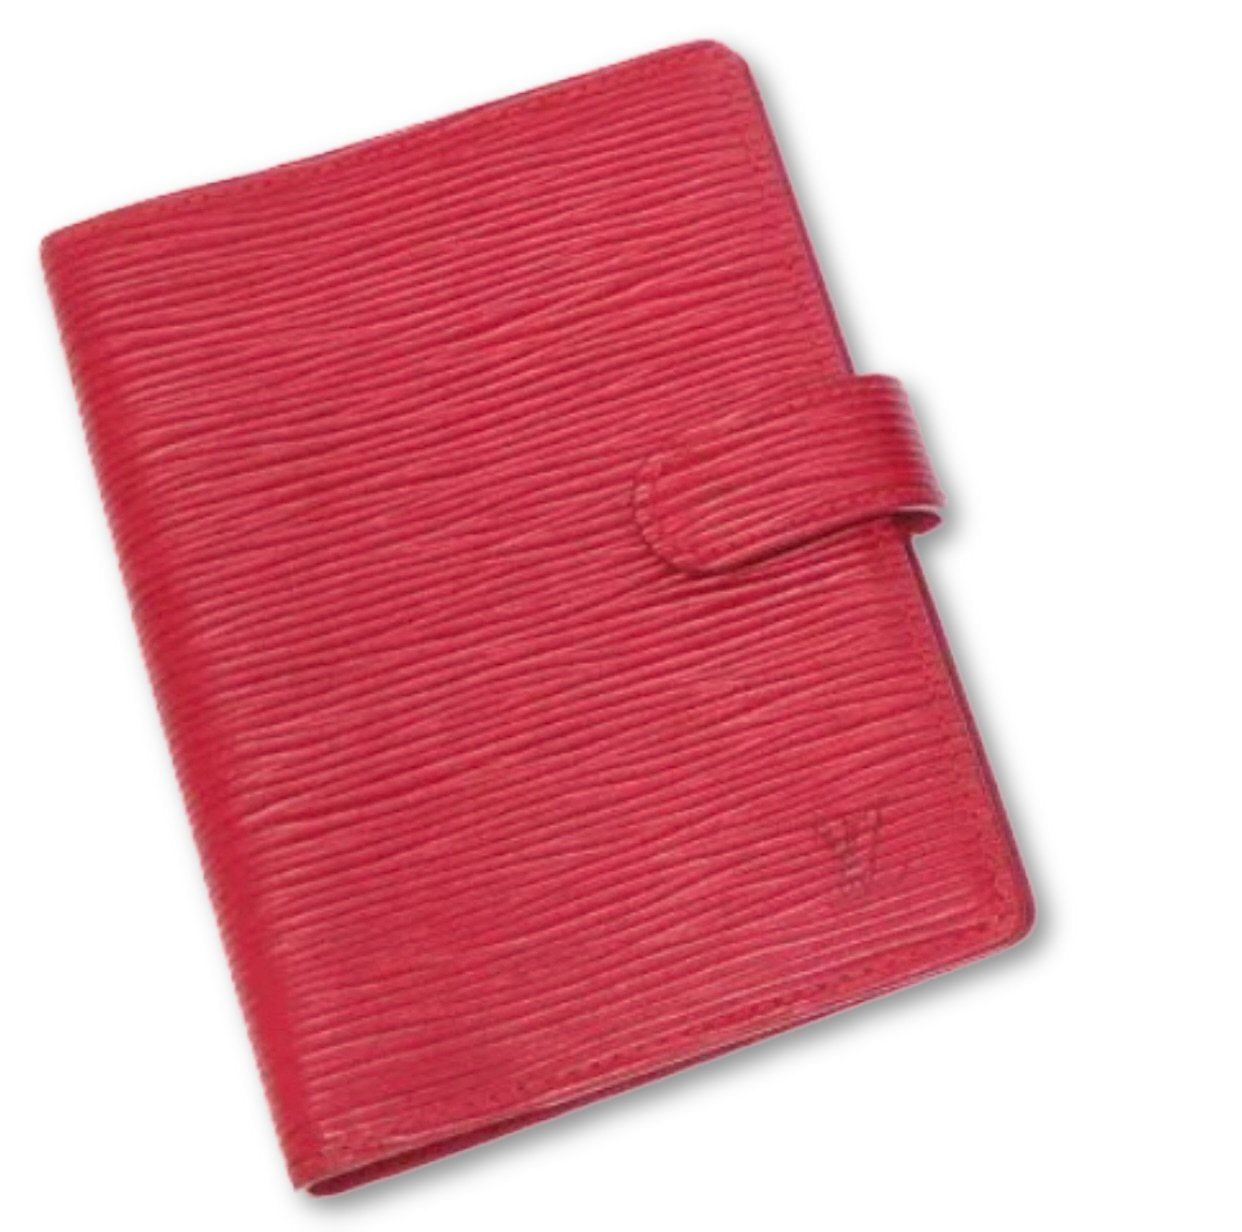 Louis Vuitton Epi Small Ring Agenda Cover - Red Books, Stationery